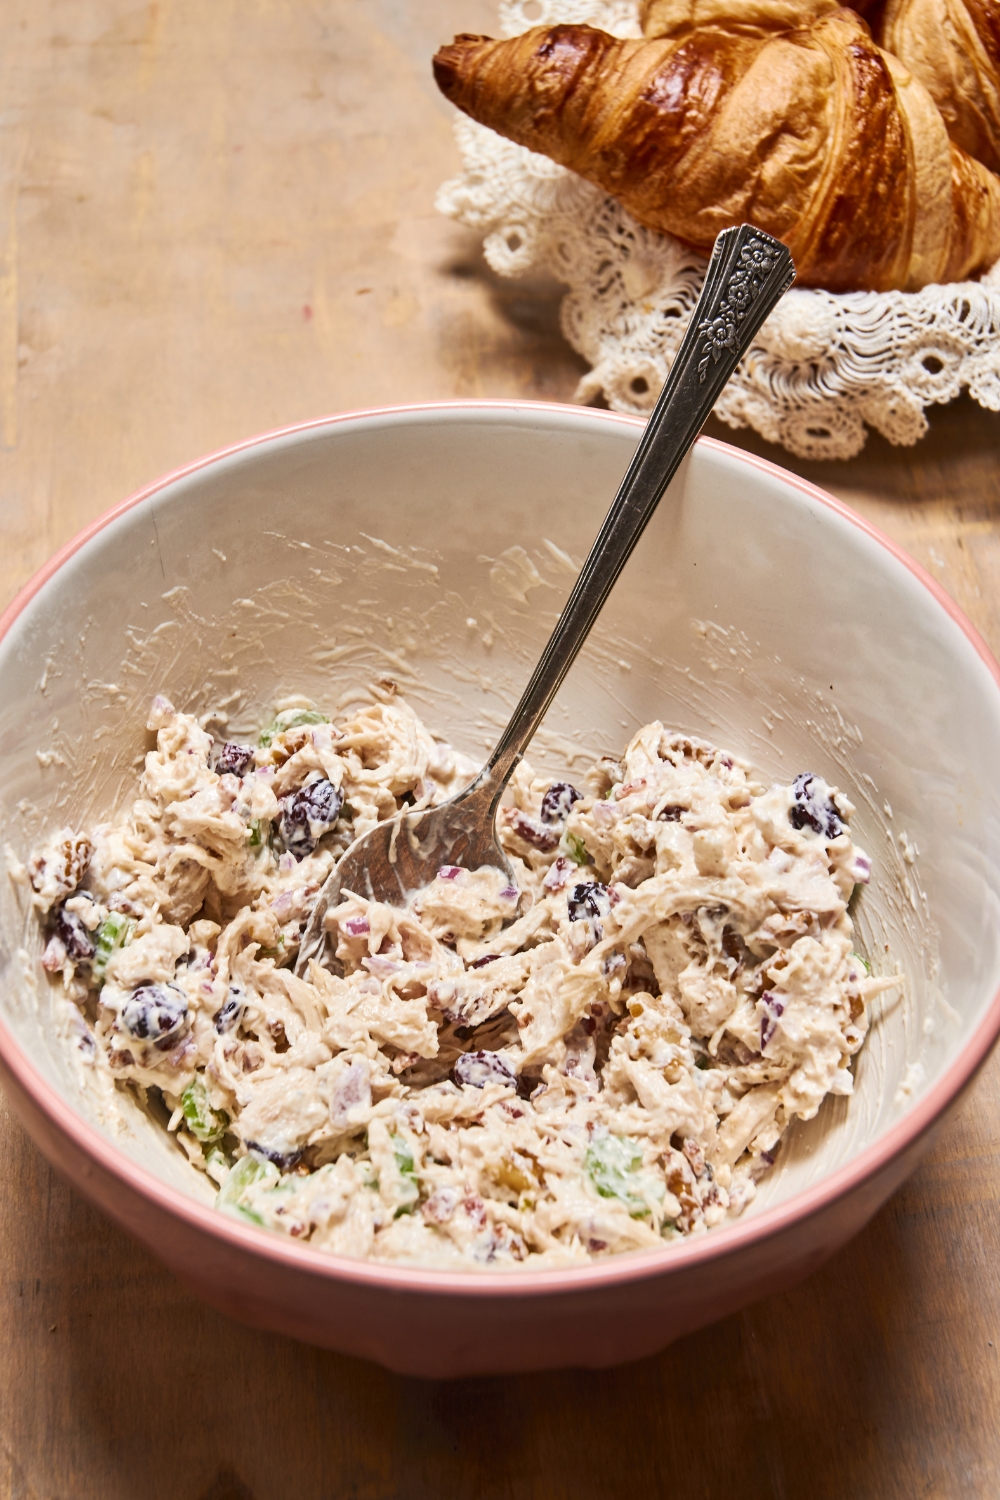 A gray bowl is full of chicken salad filling. A spoon is in the bowl as well.